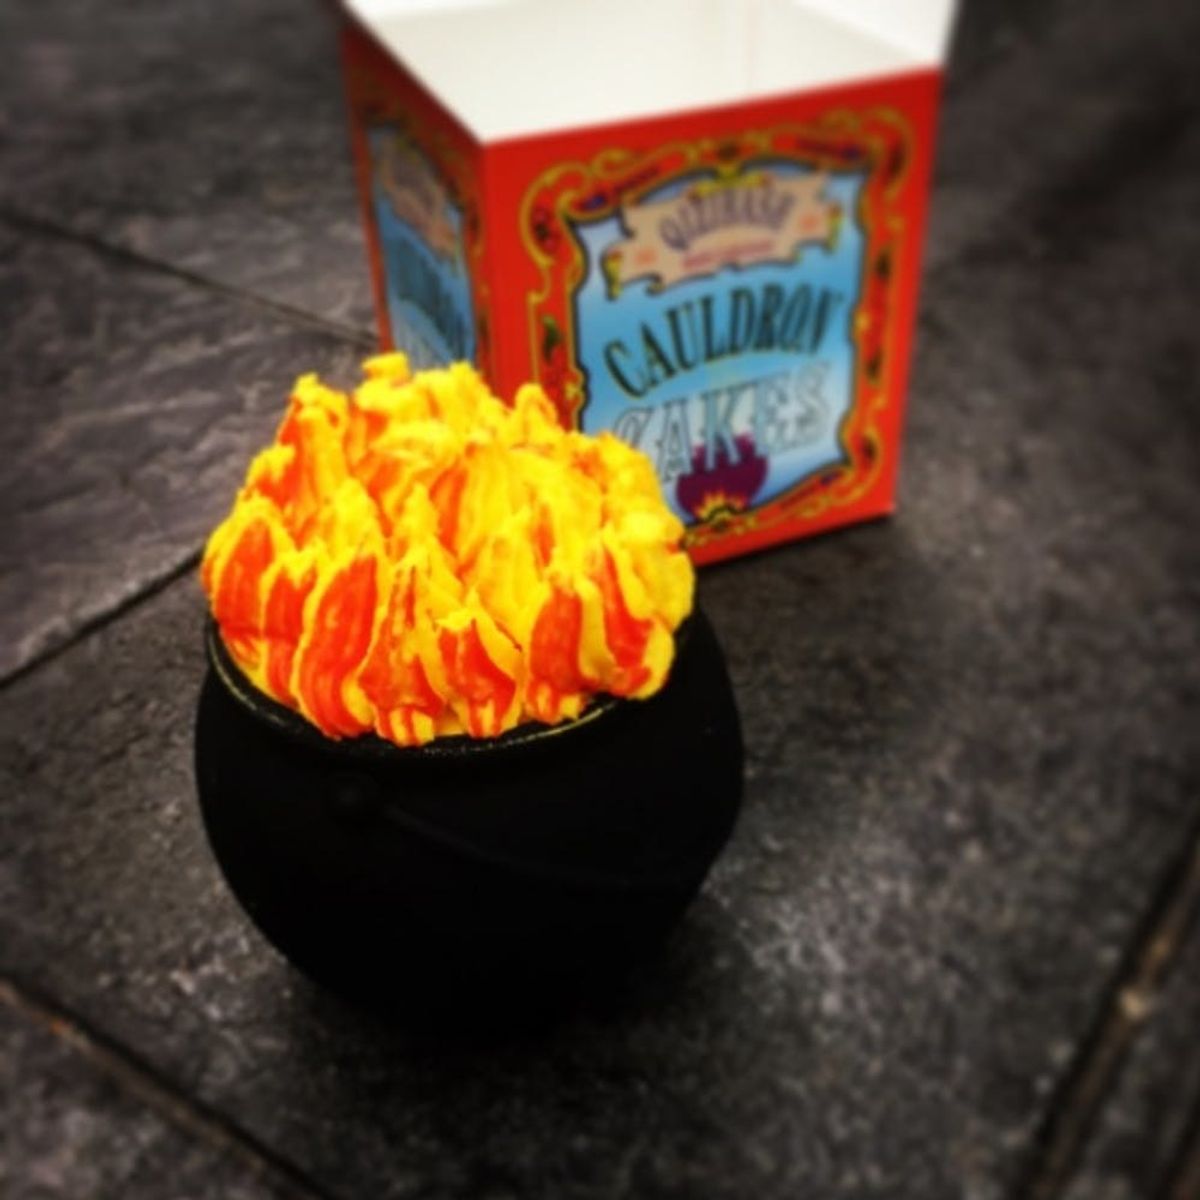 Harry Potter Cauldron Cakes Are the Yummiest Things to Happen to the Wizarding World